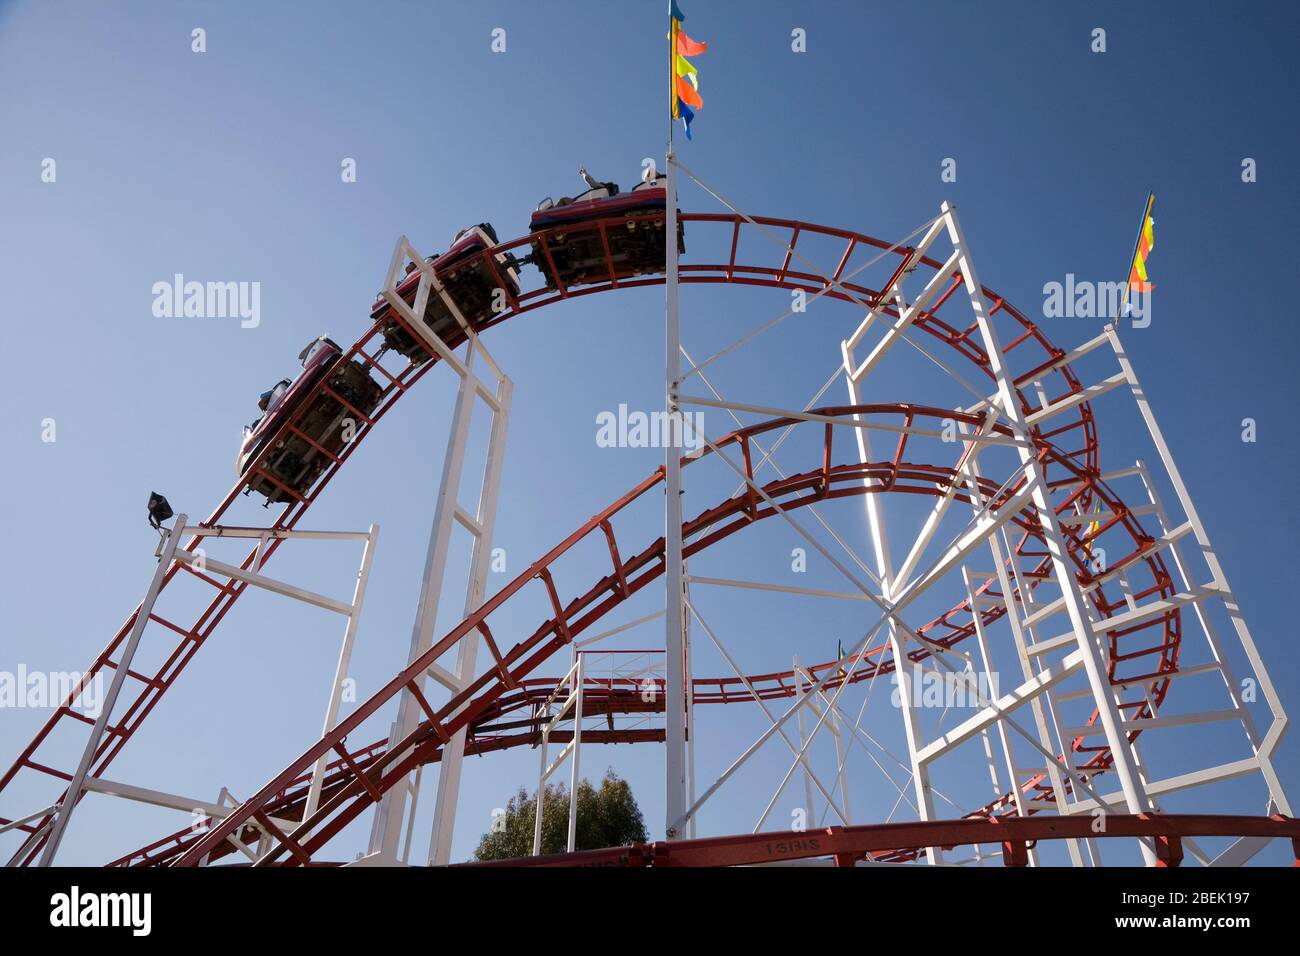 A small roller coaster at a carnival. Stock Photo